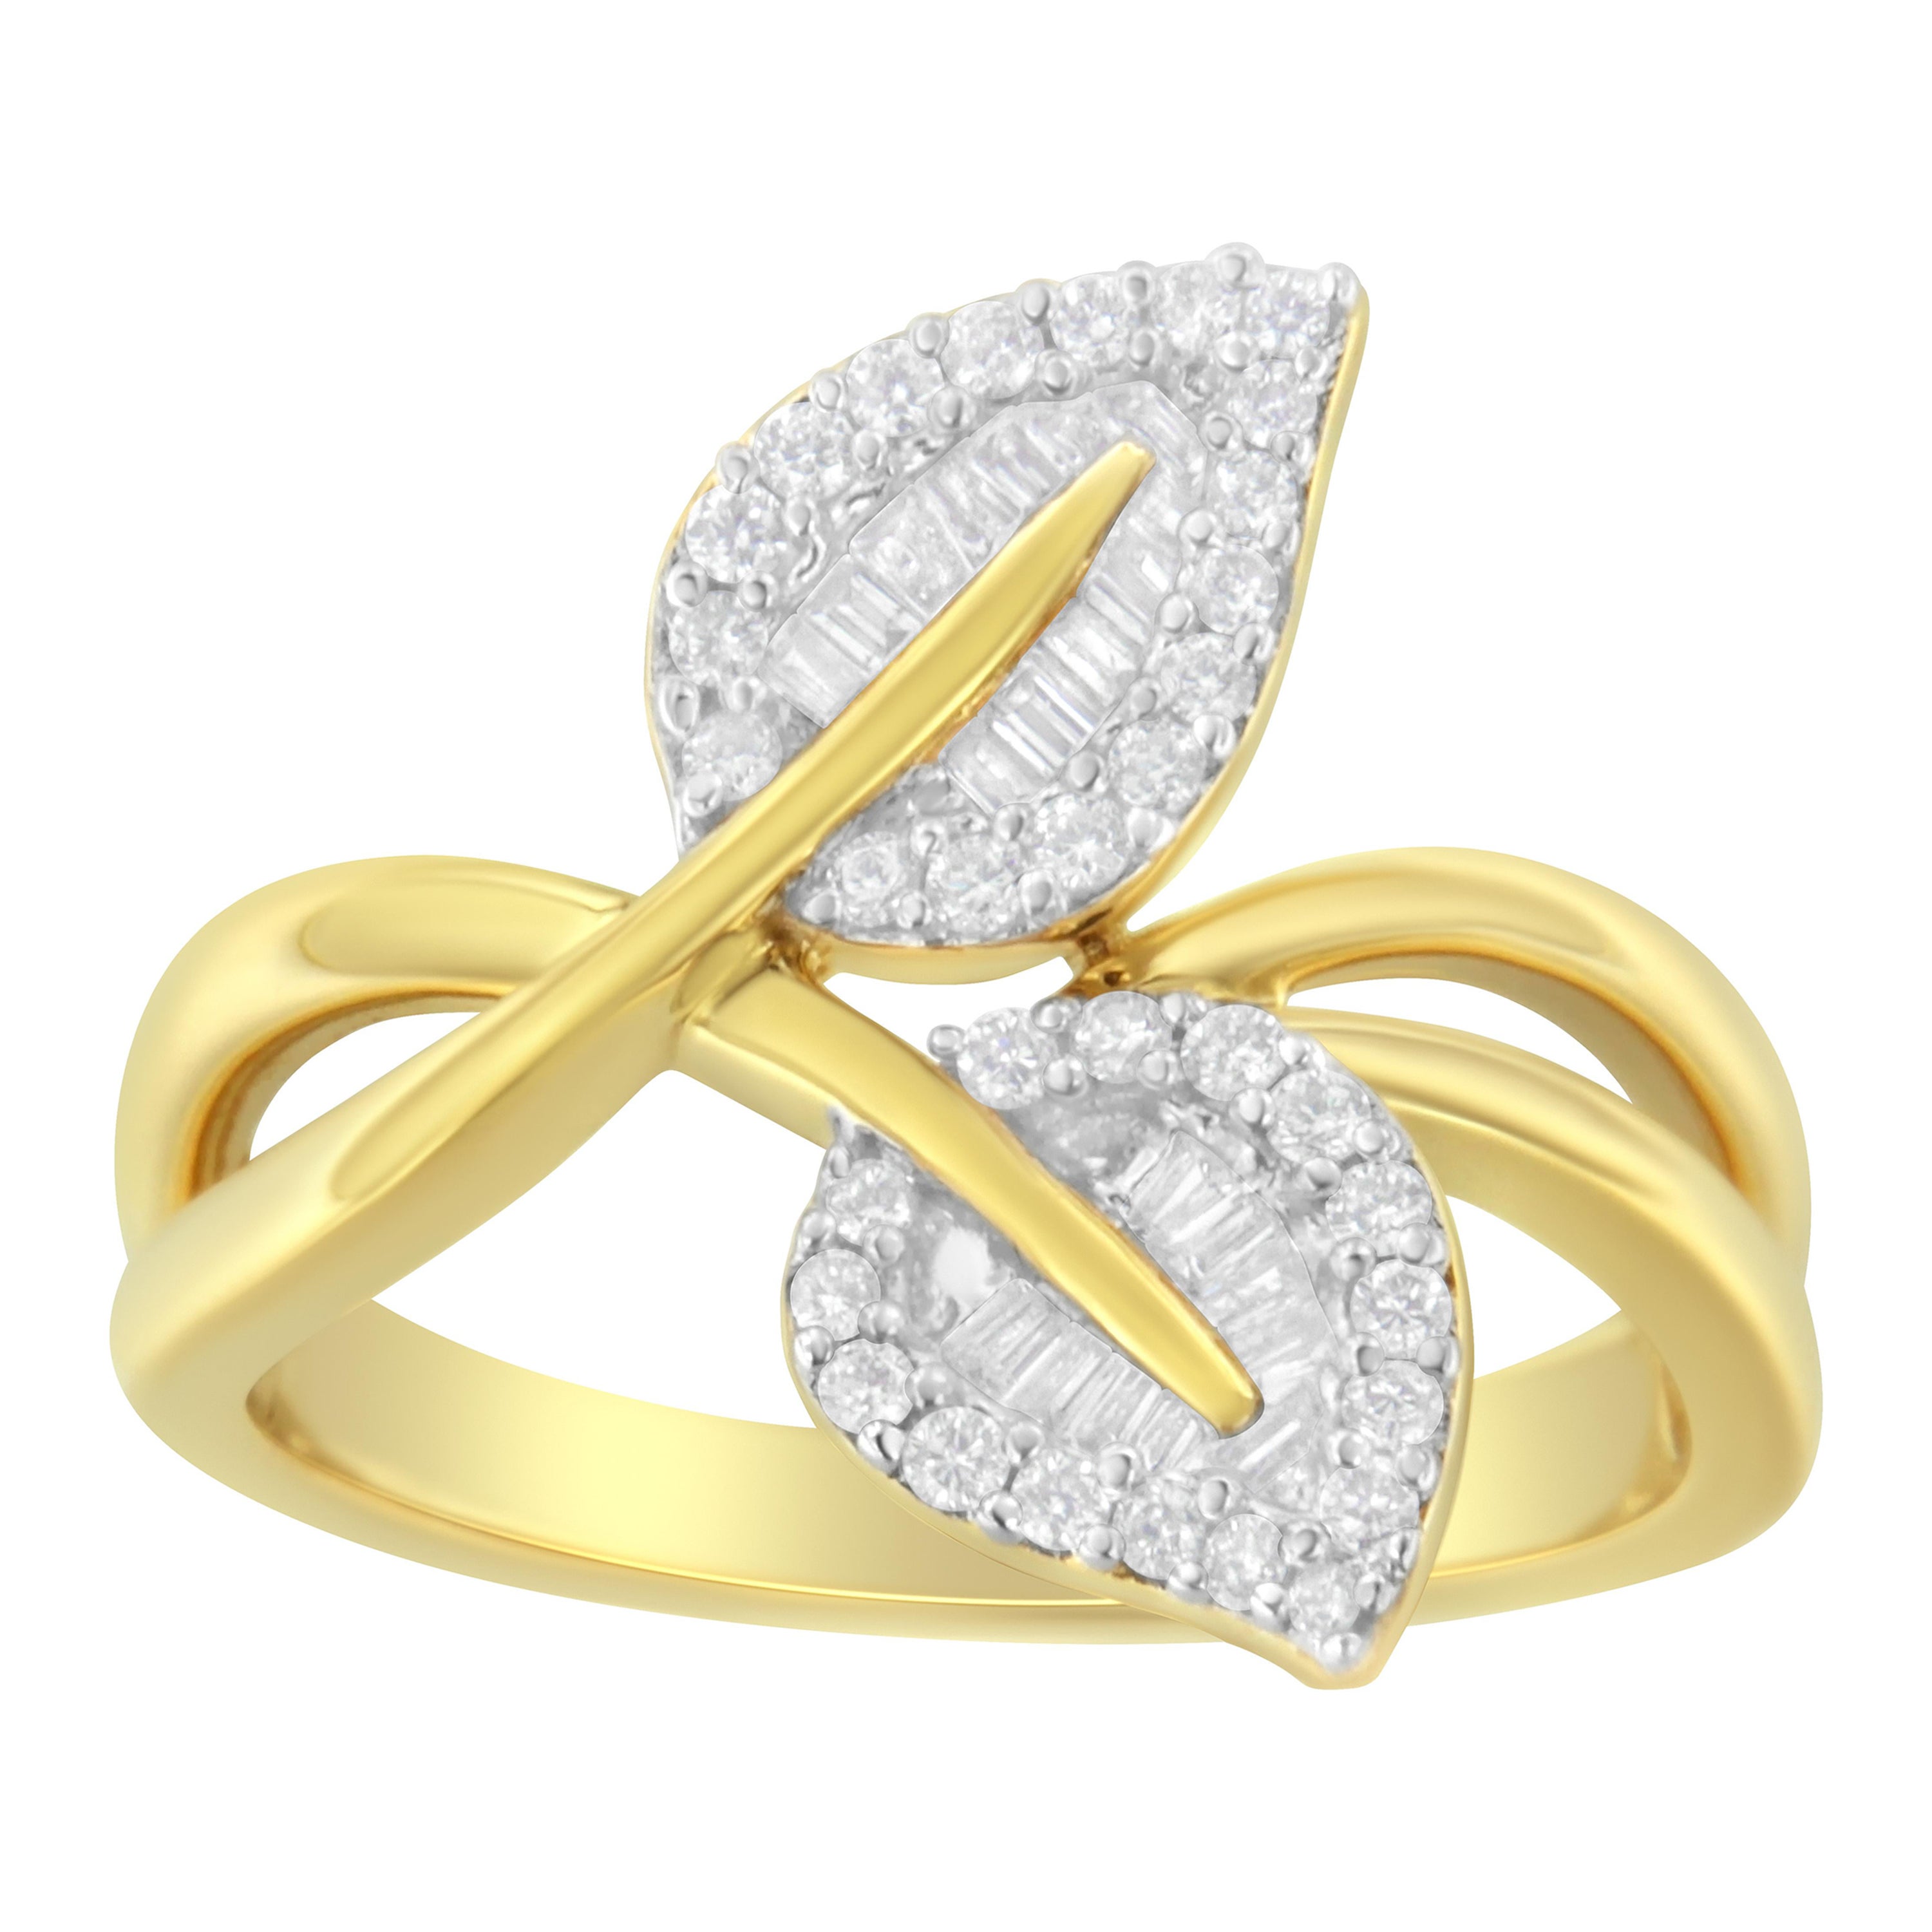 10K Yellow Gold 3/8 Carat Round and Baguette-Cut Diamond Leaf Cocktail Ring